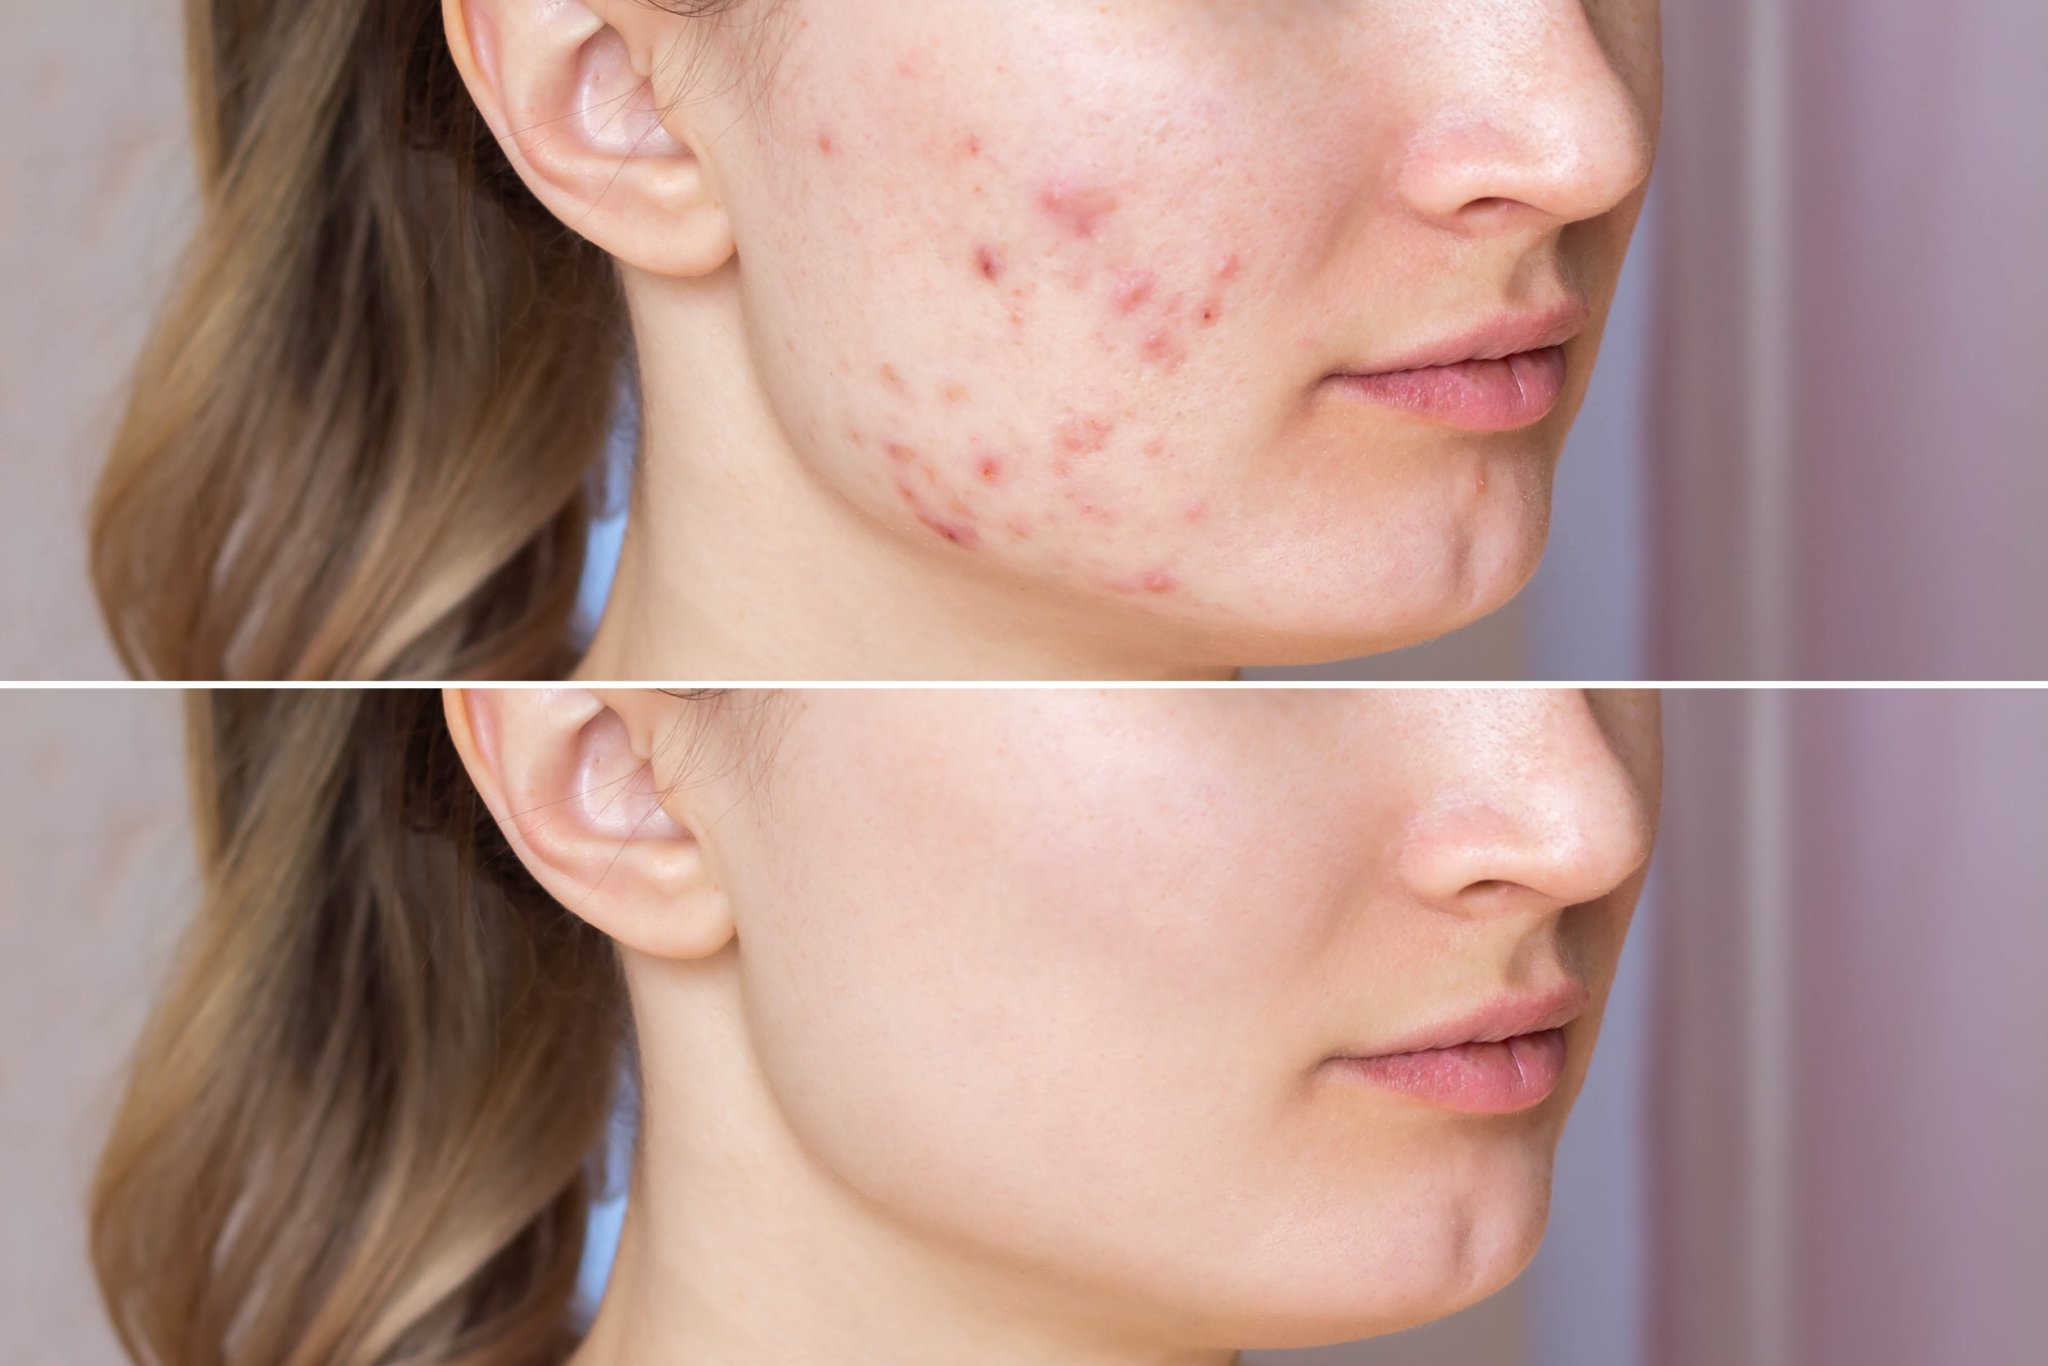 How To Get Rid Of Acne Scars Treatments And Home Remedies